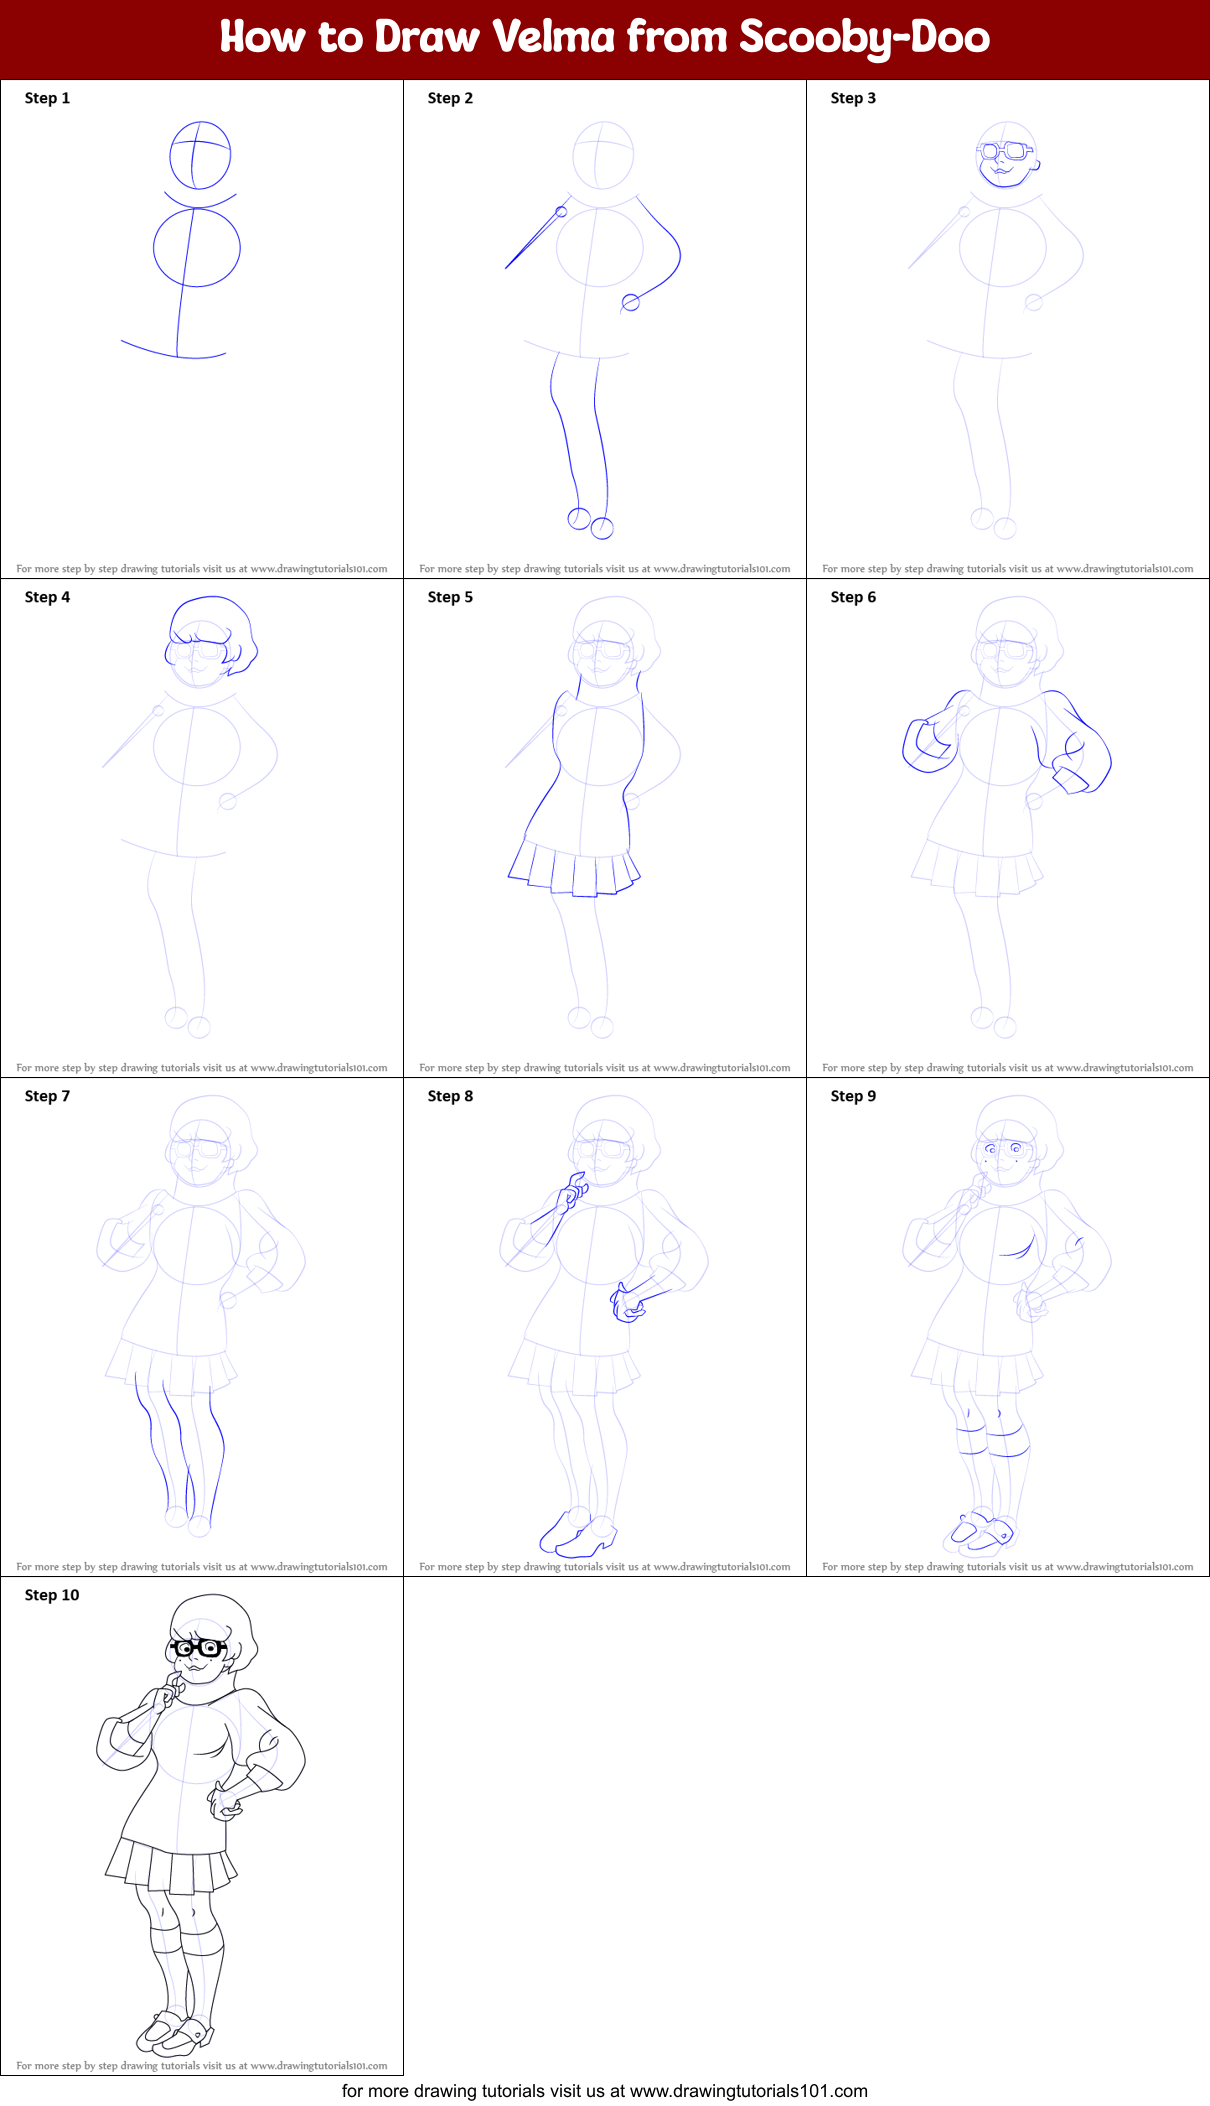 How to Draw Velma from Scooby-Doo printable step by step drawing sheet